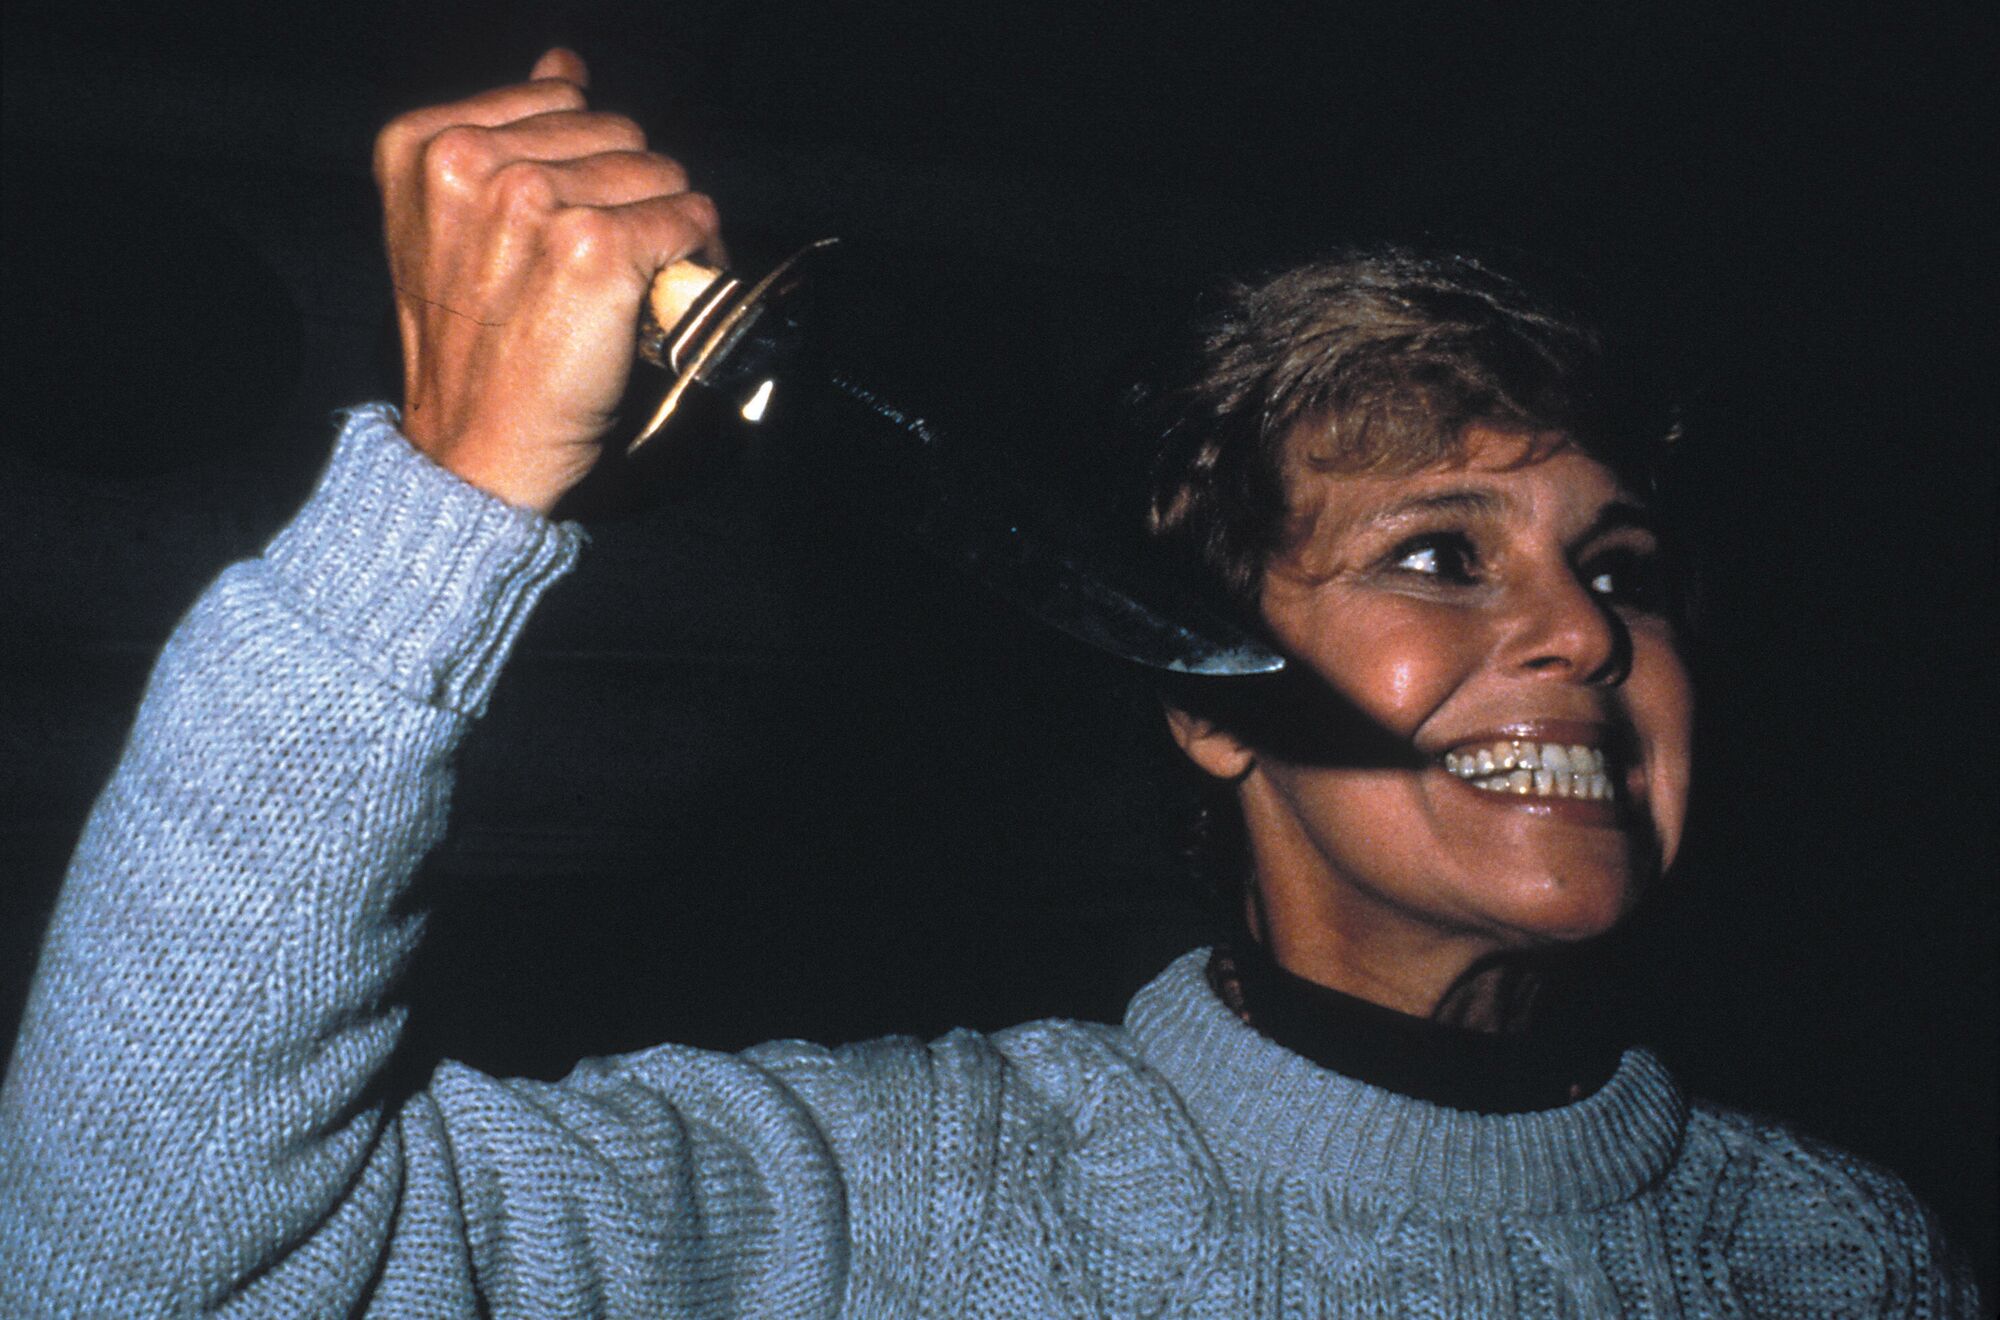 Pamela Voorhees | Friday the 13th Wiki | FANDOM powered by Wikia